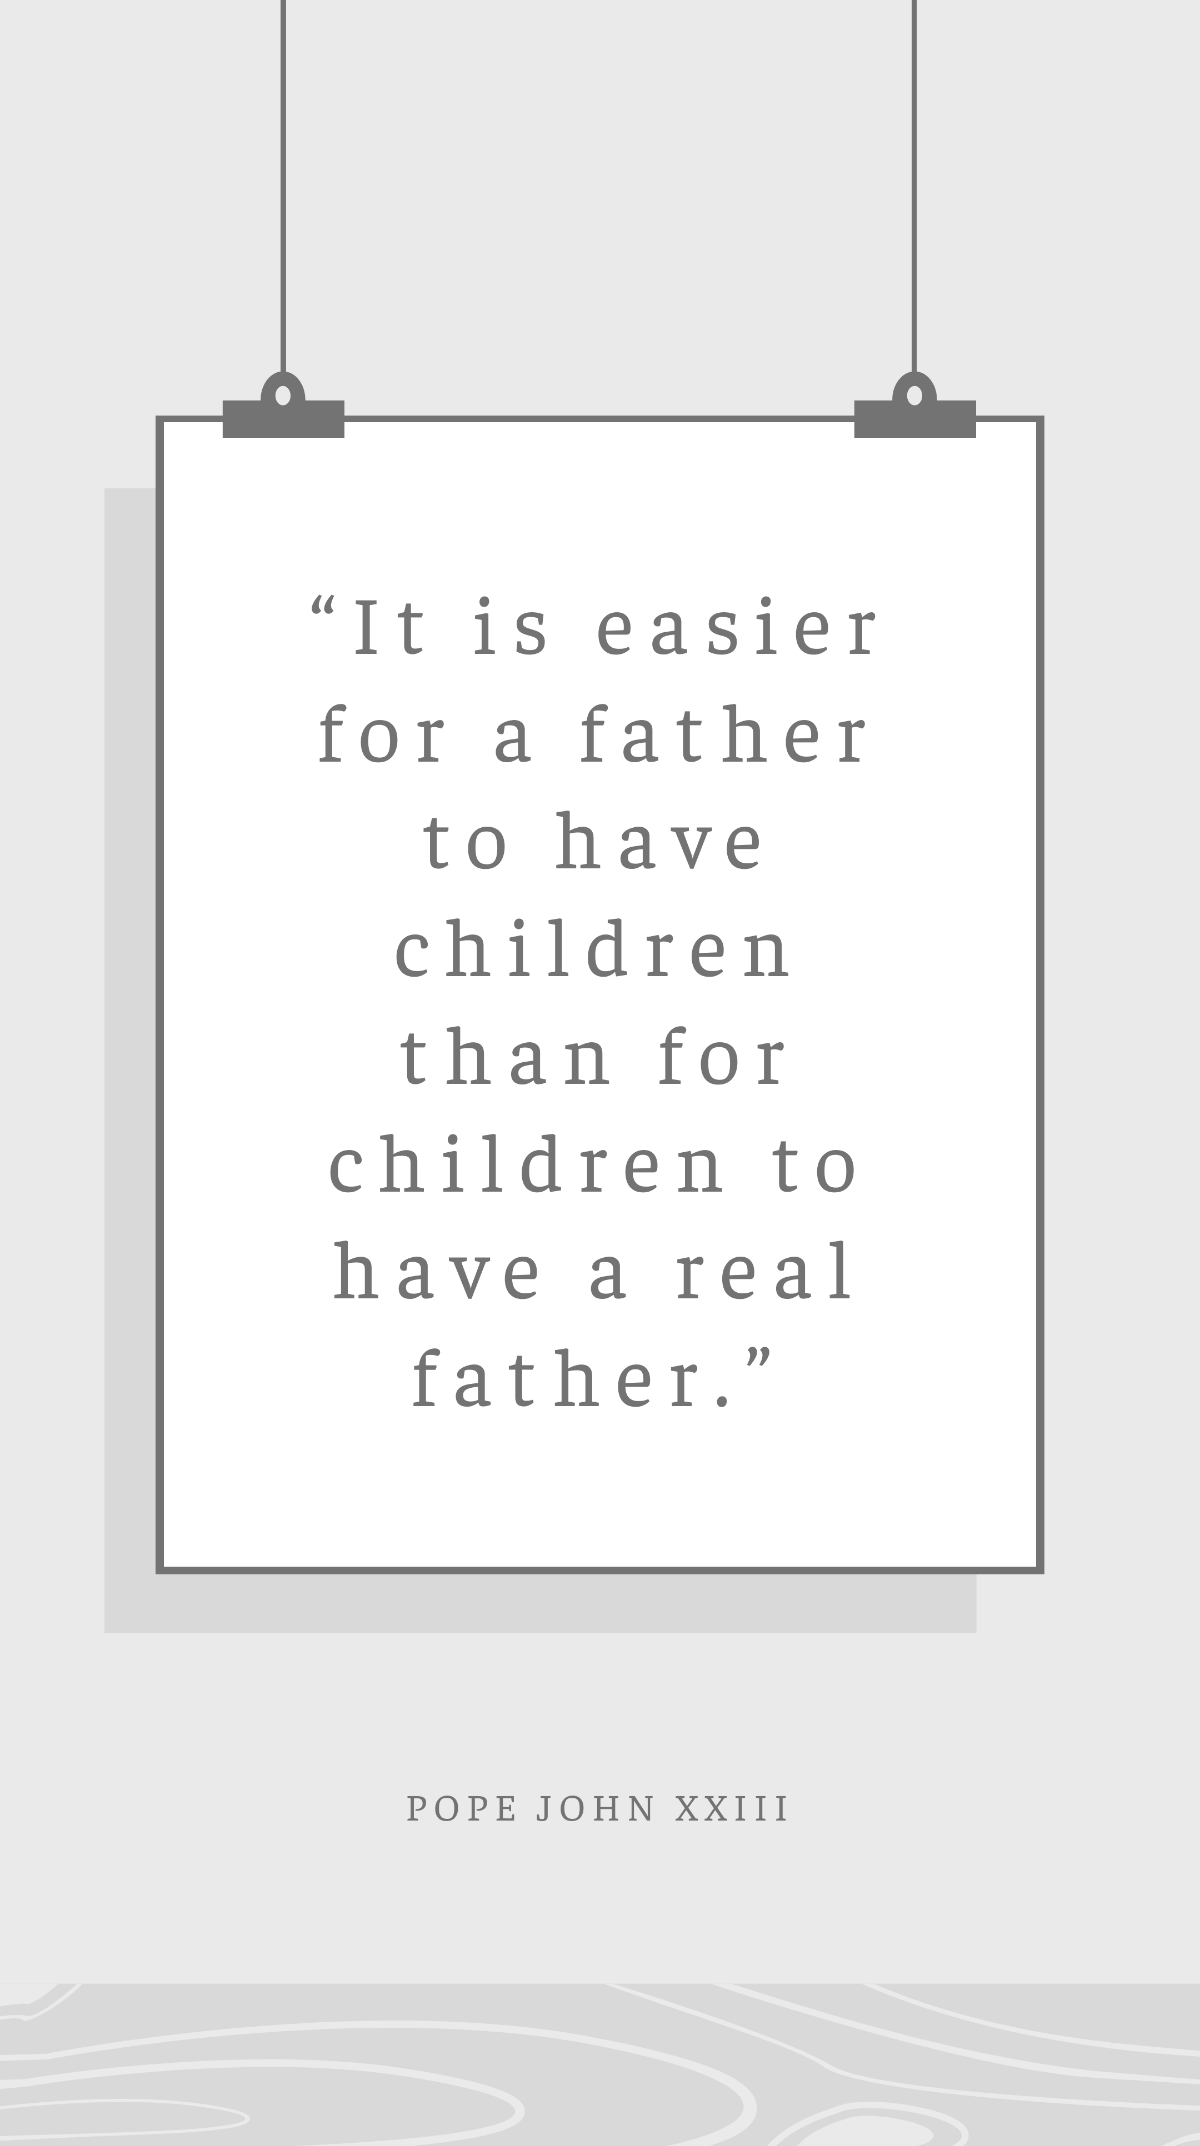 Pope John XXIII - “It is easier for a father to have children than for children to have a real father.” Template